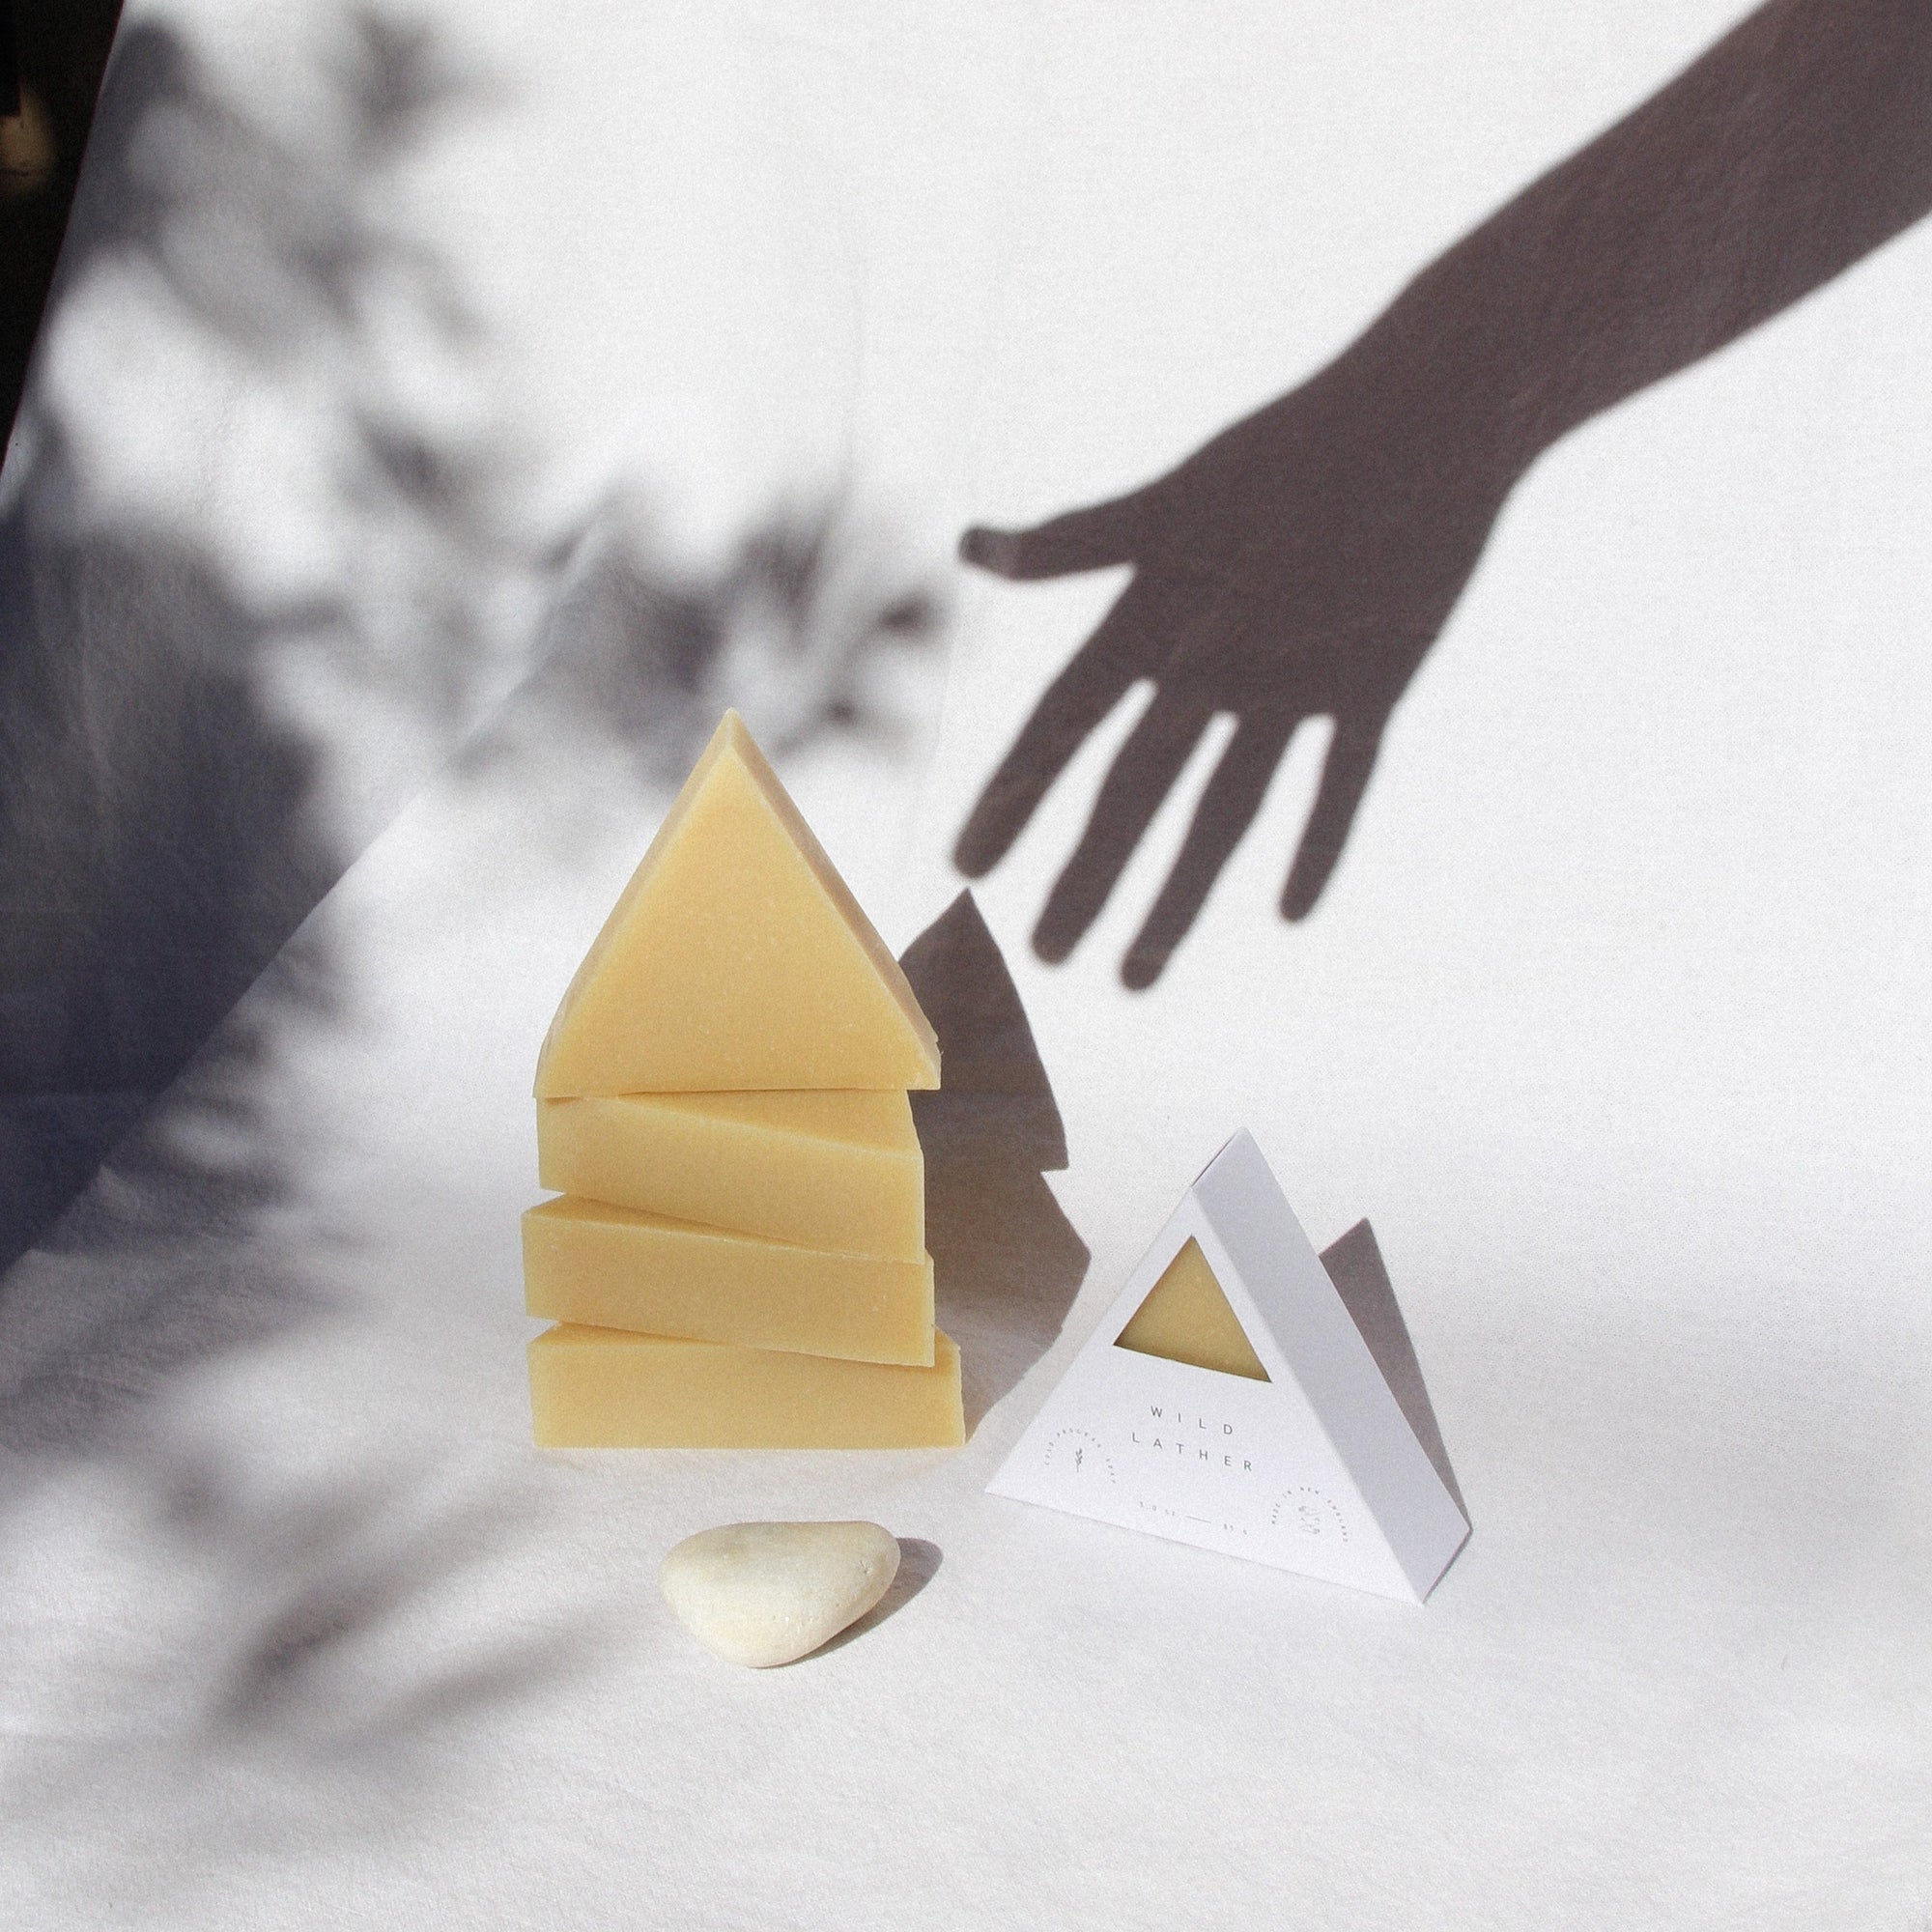 Five triangle soaps and a beach stone against a white cloth with the shadow of a hand and trees